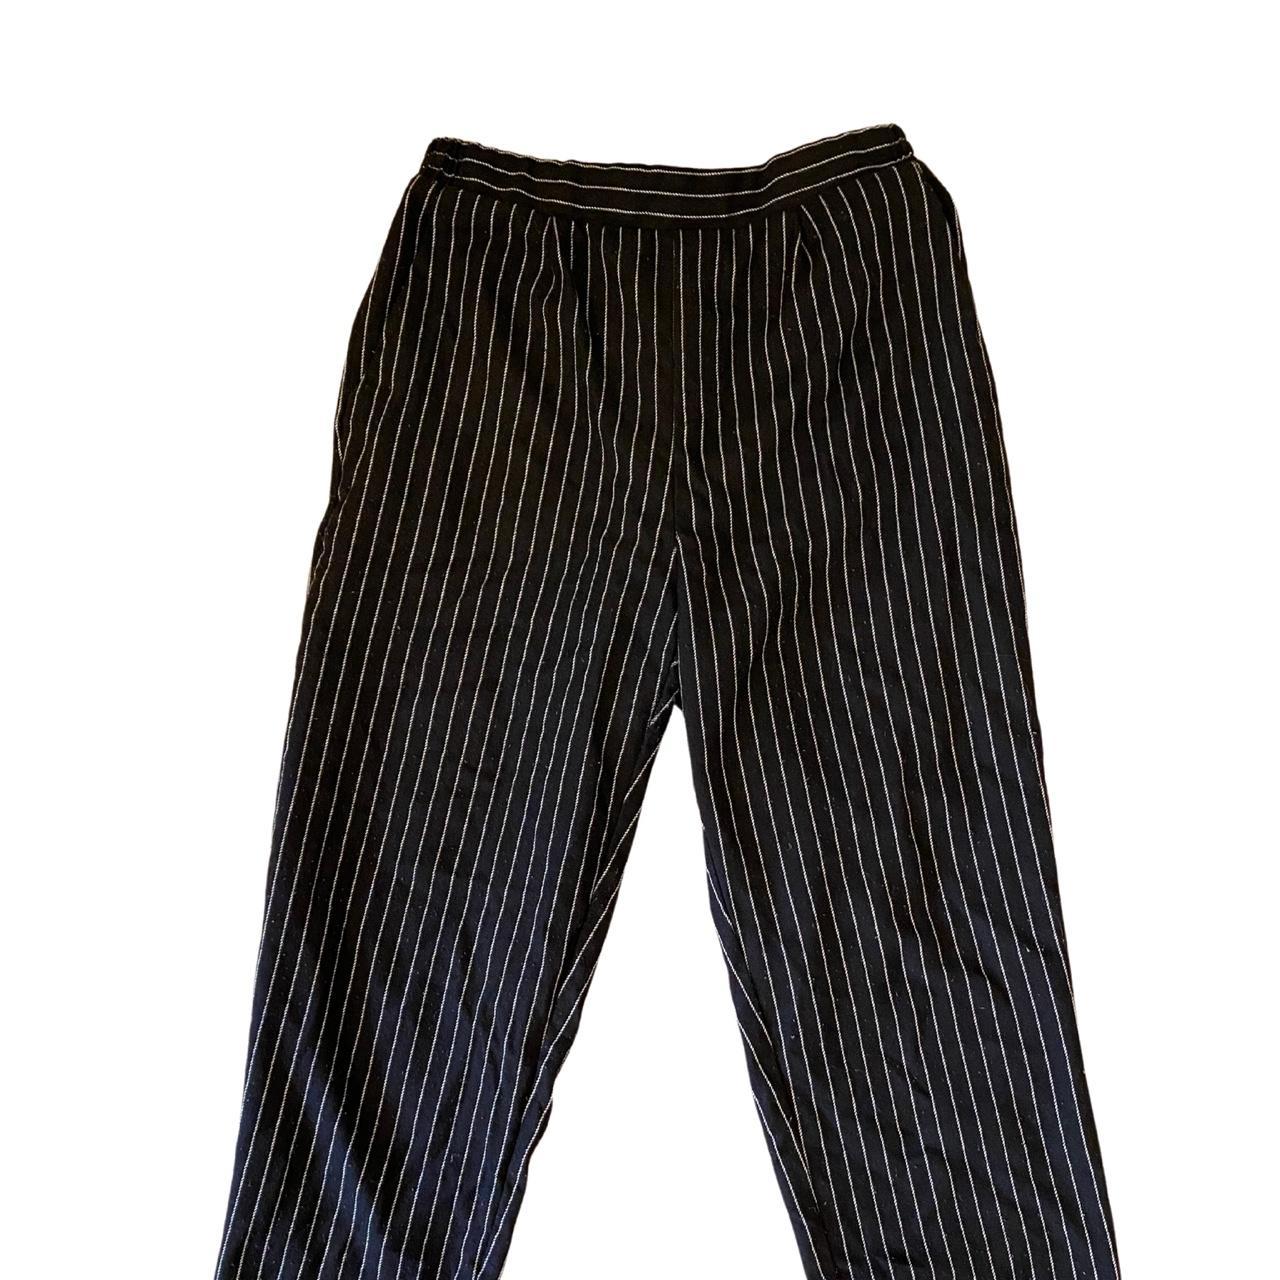 forever 21 vertical striped pants black and white, - Depop